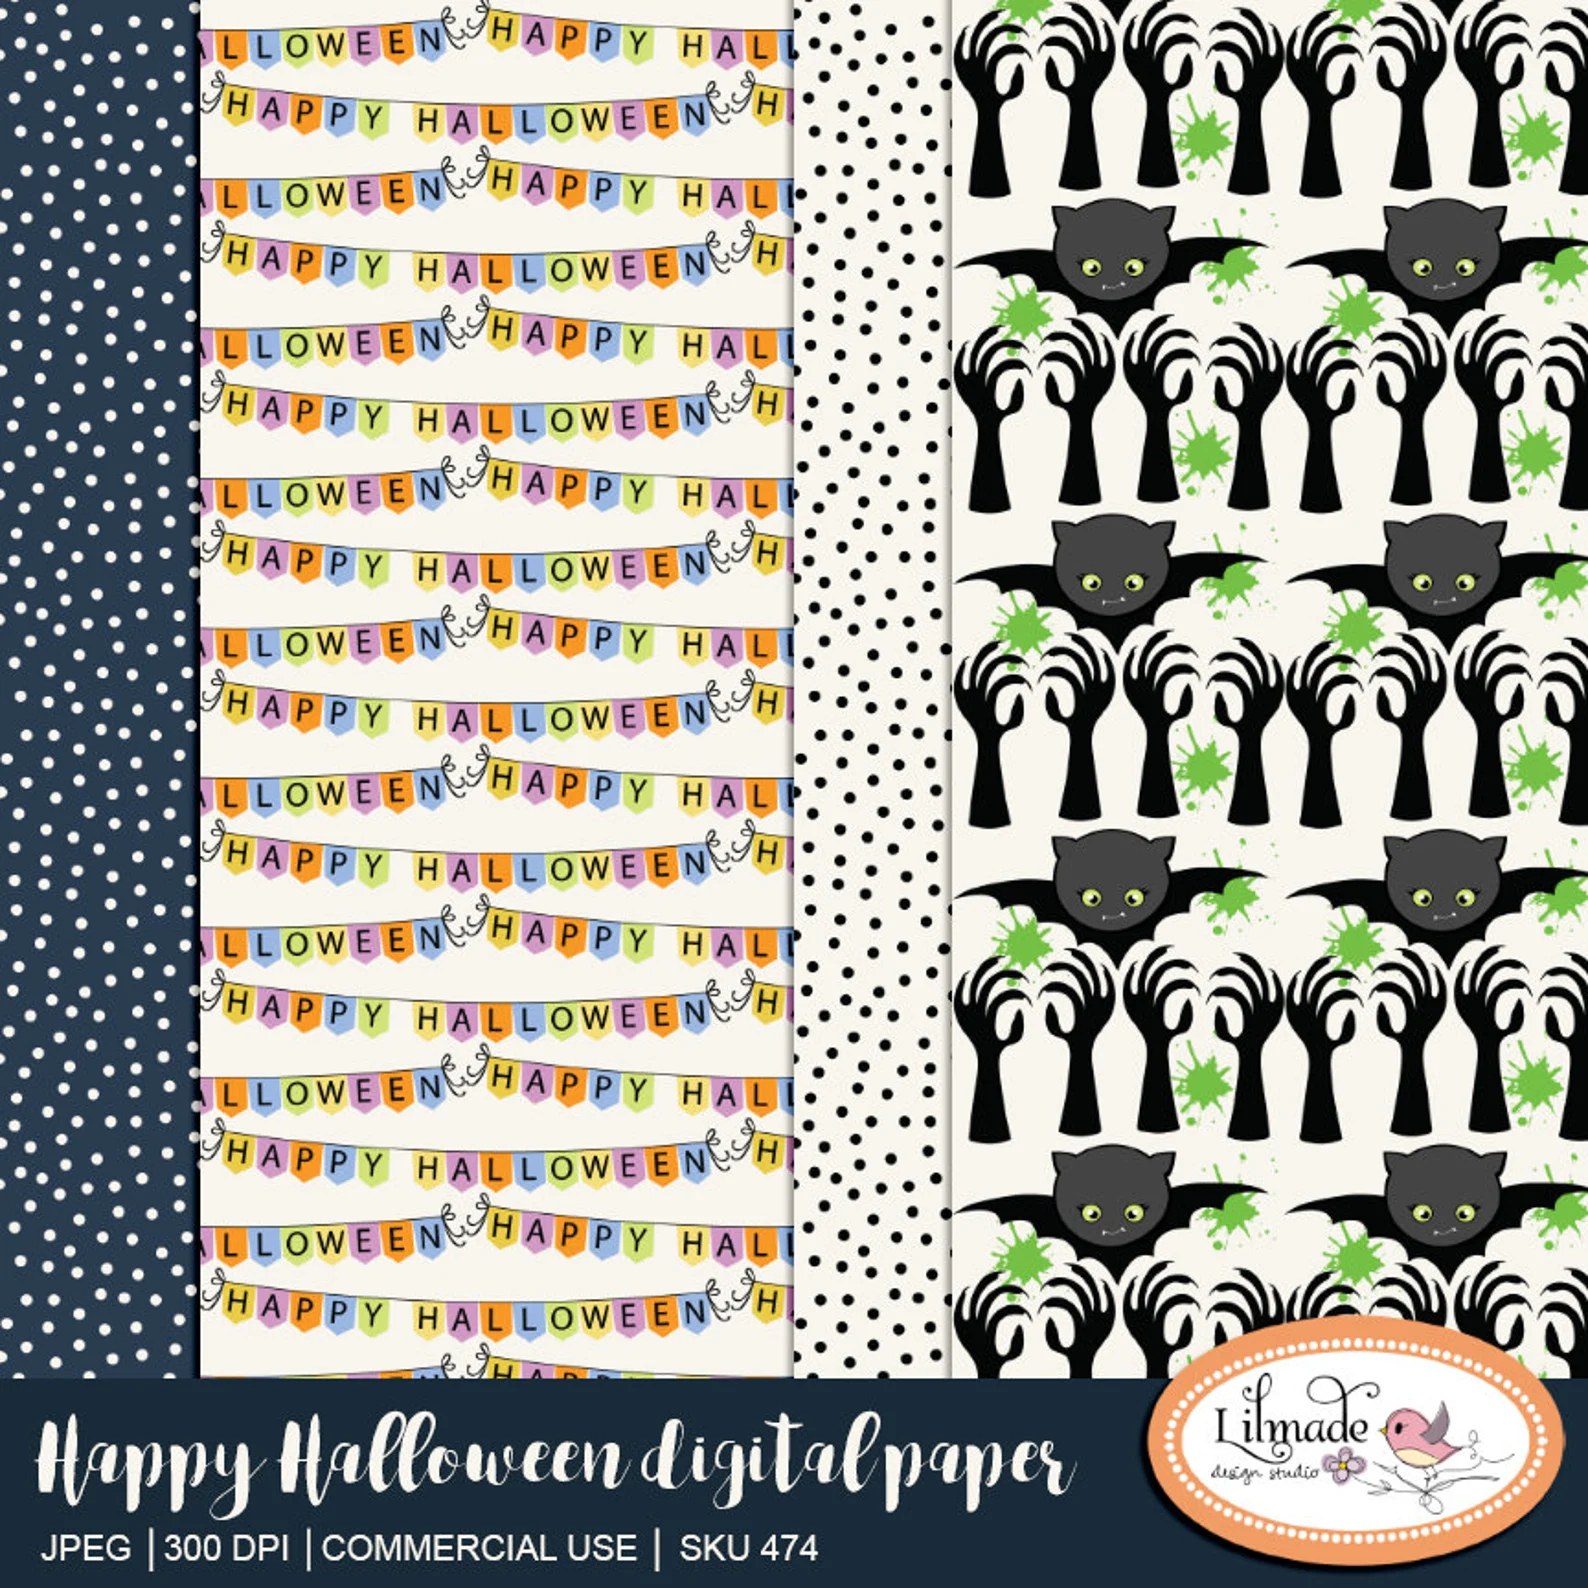 Happy Halloween digital scrapbook papers for commercial use